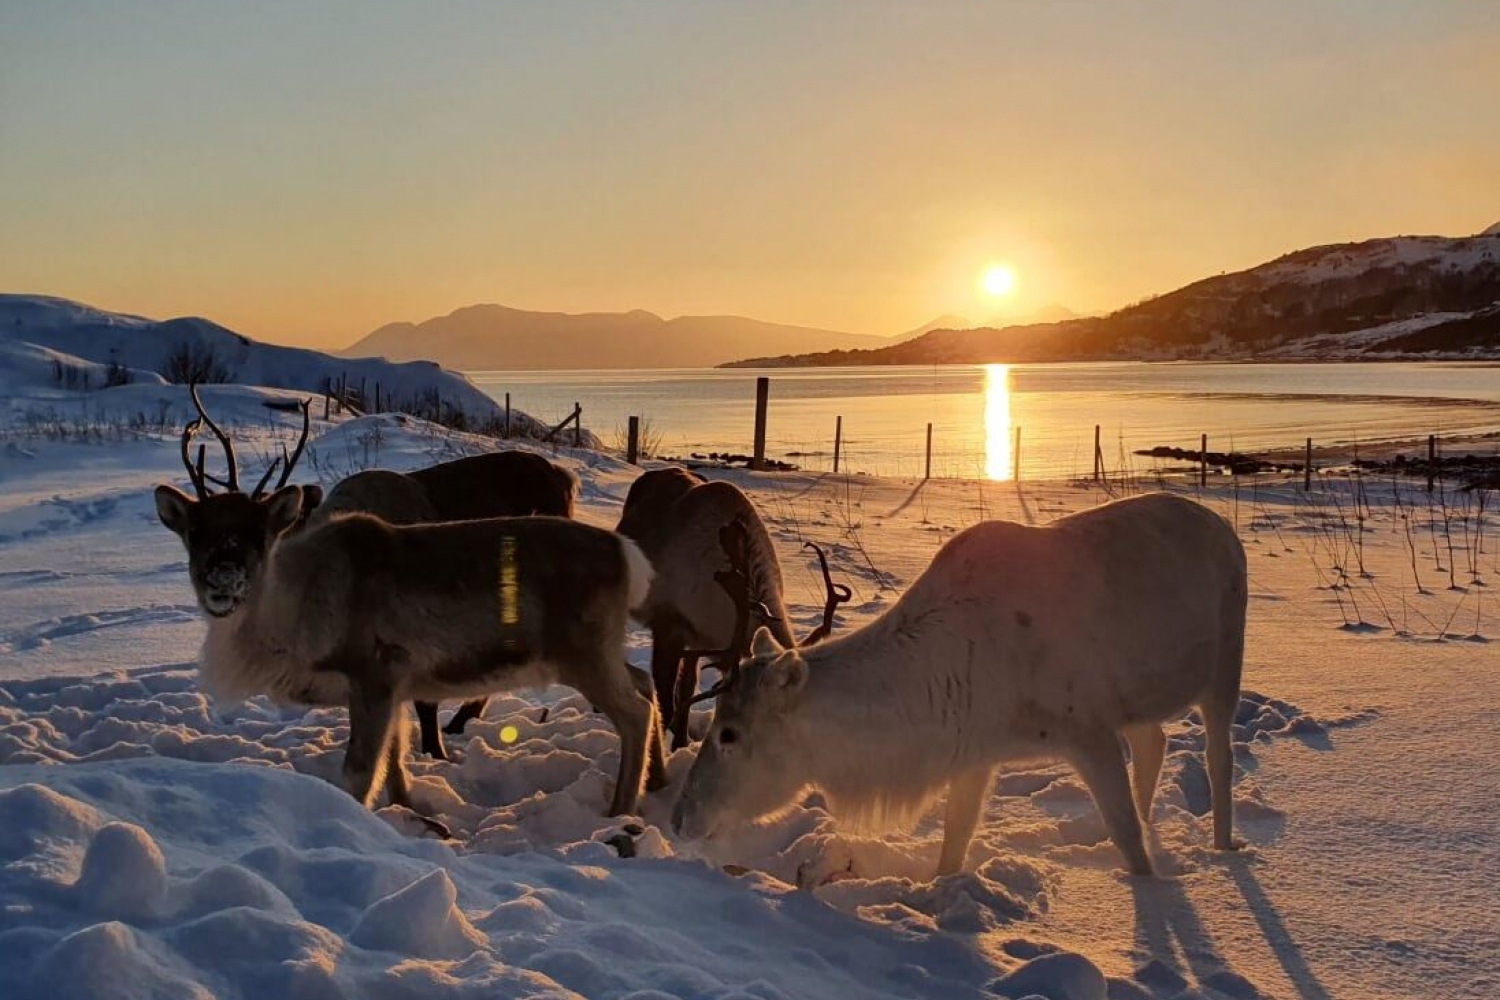 Reindeer in the snow, sun in the background